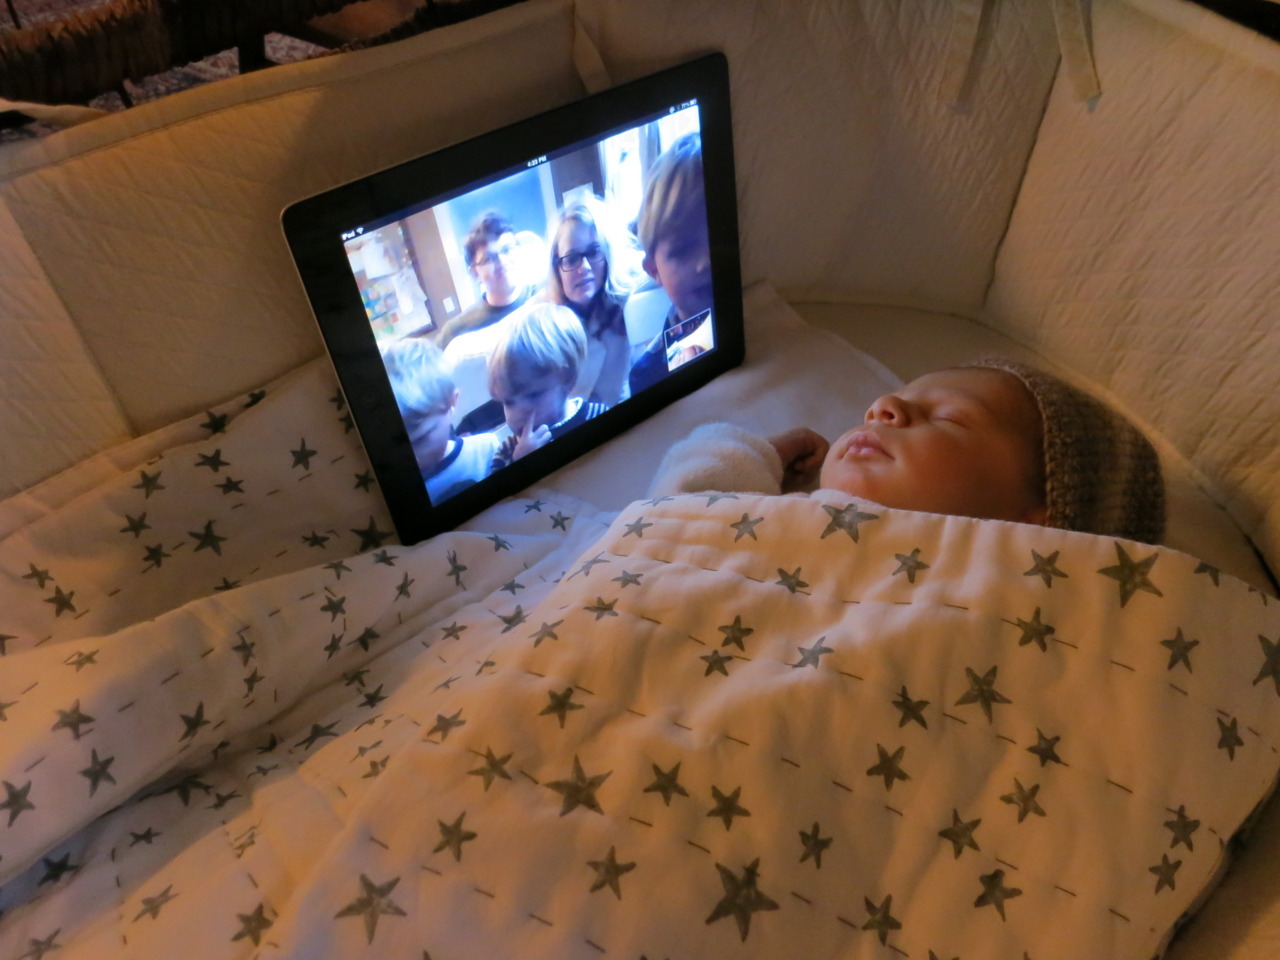 Maxwell, the 4 days old genius! Already enjoys skyping his cousins from bed.